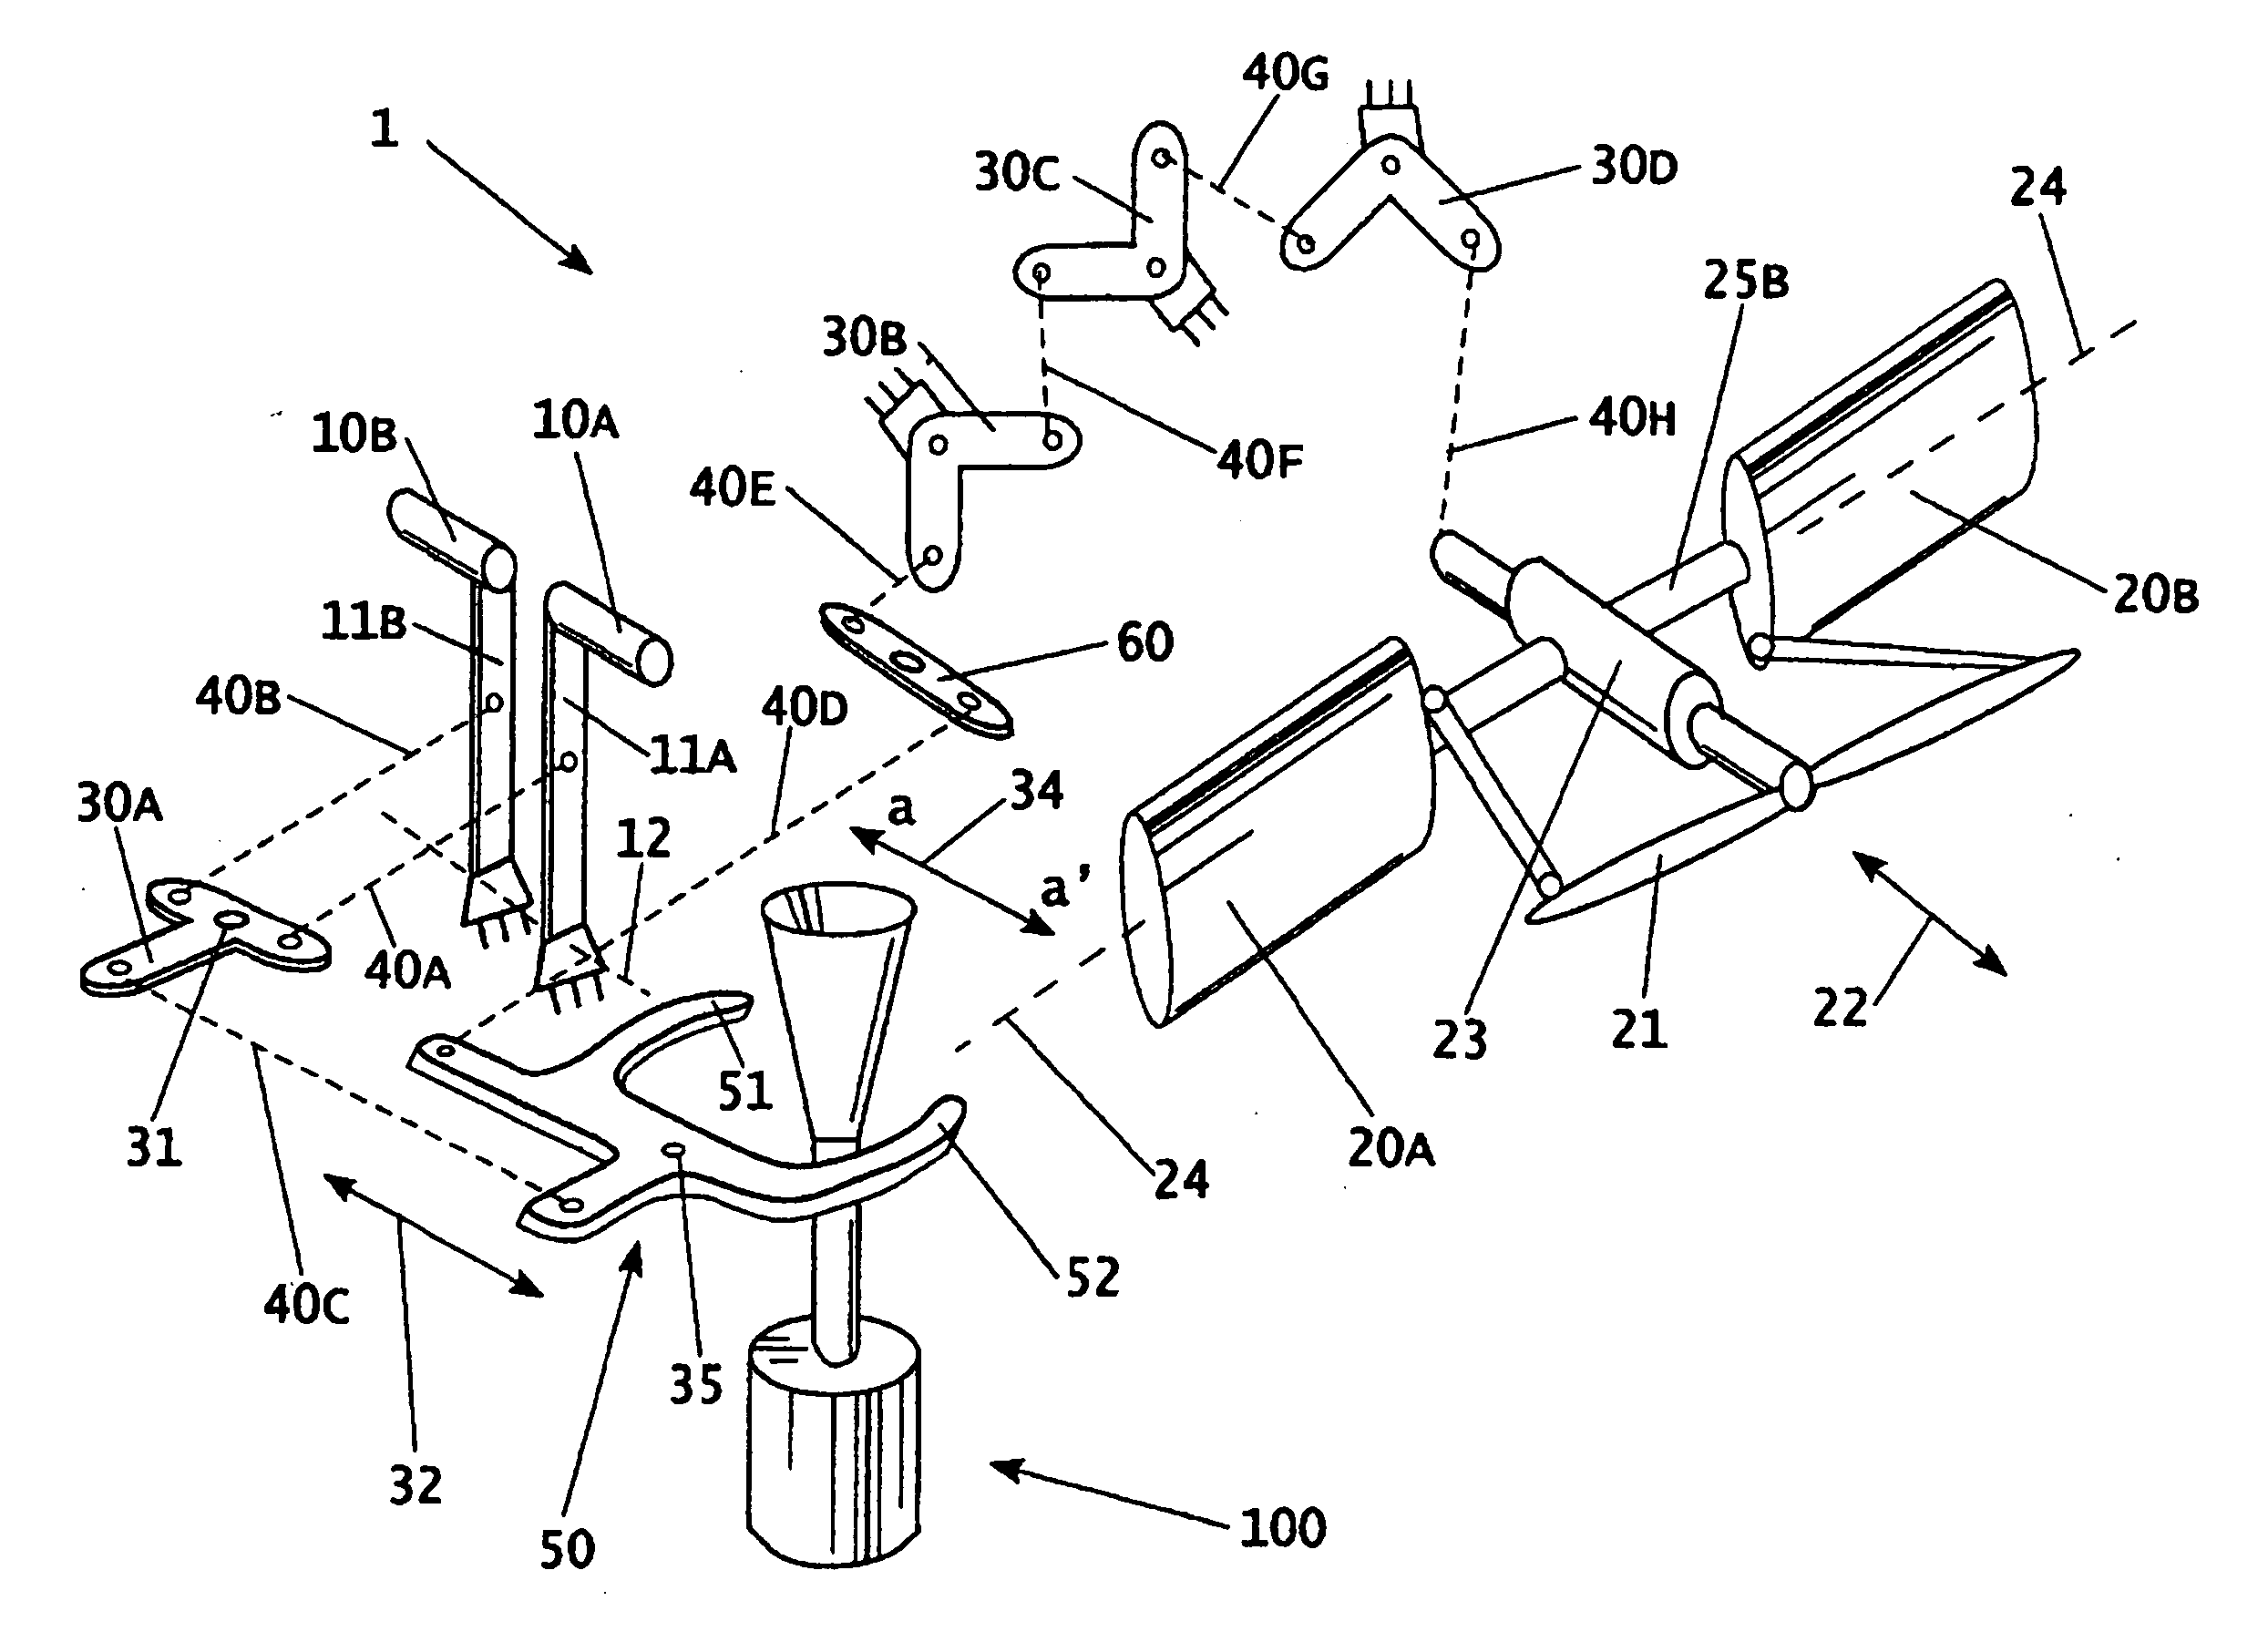 Mechanical density altitude compensation device for helicopter tail rotors